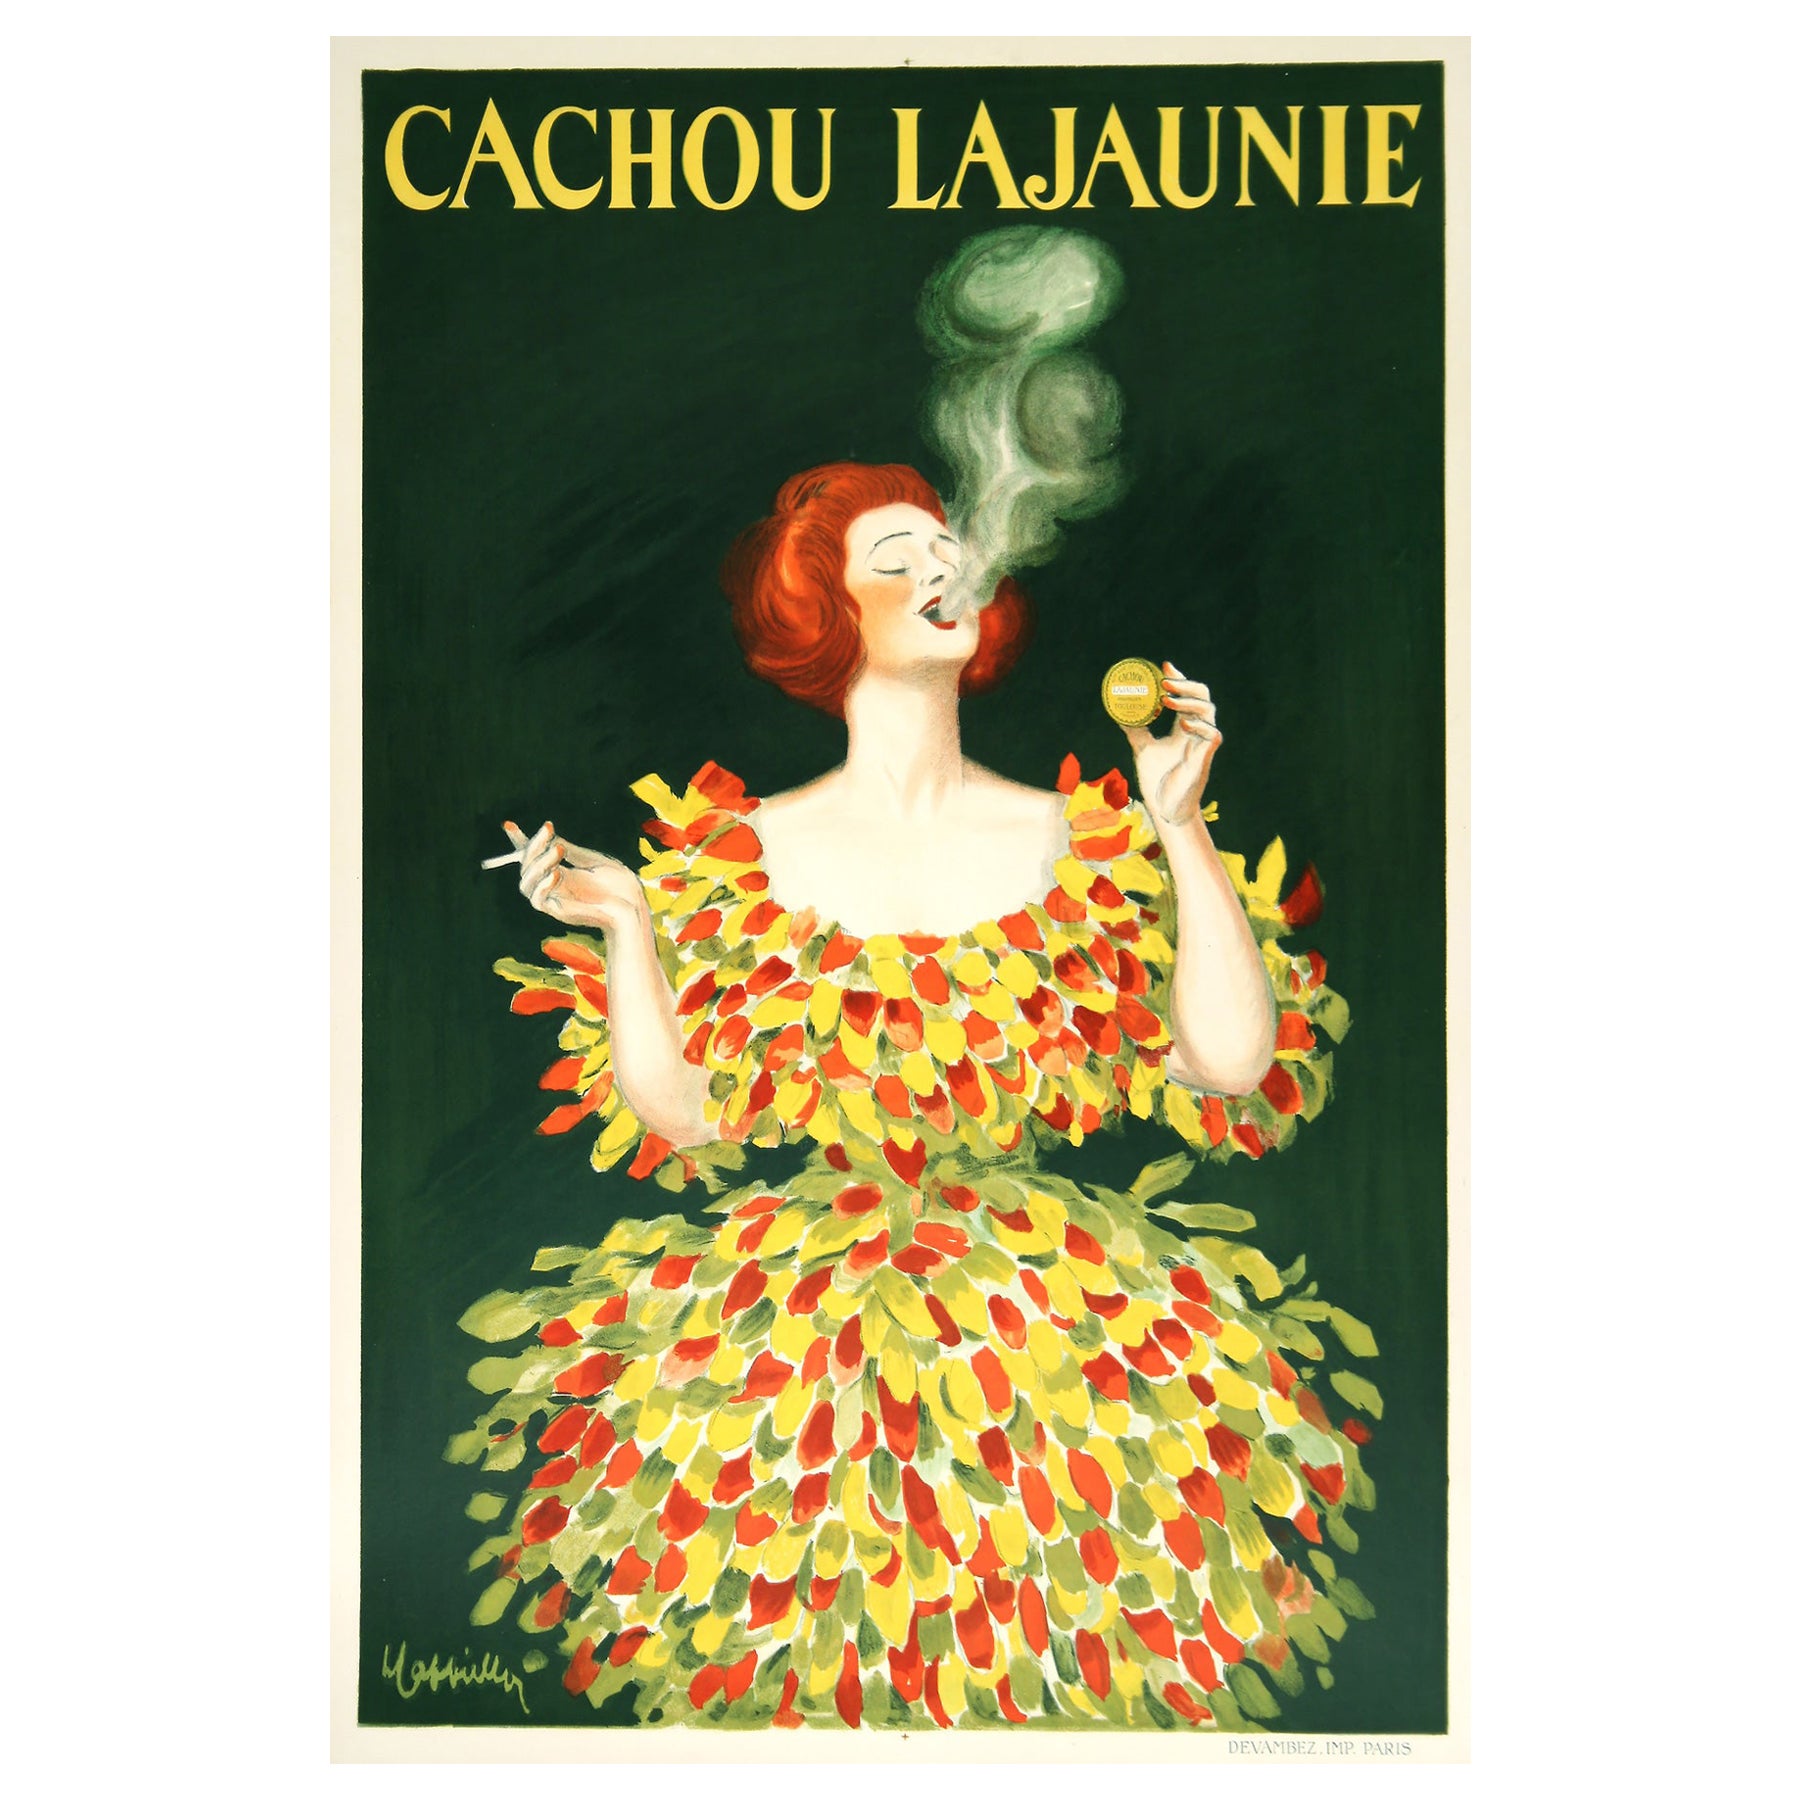 Cachou Lajaunie 1922 Vintage French Advertising Poster, Leonetto Cappiello For Sale